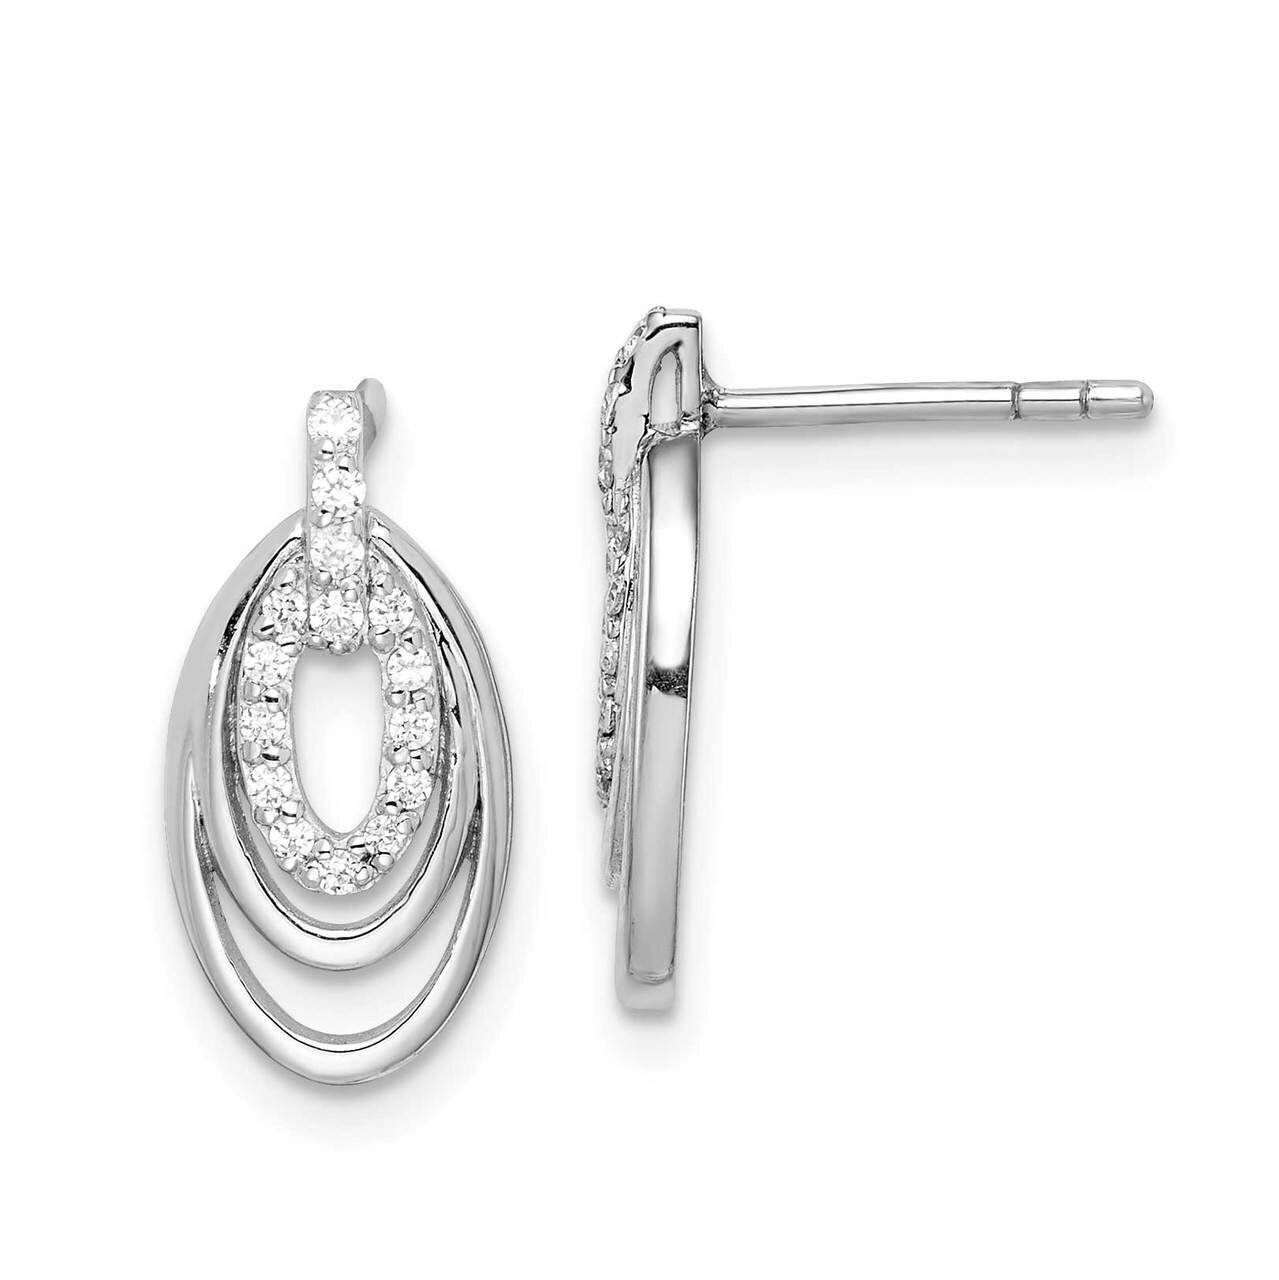 3-Oval Post Earrings Sterling Silver Rhodium-plated CZ Diamond QE14942